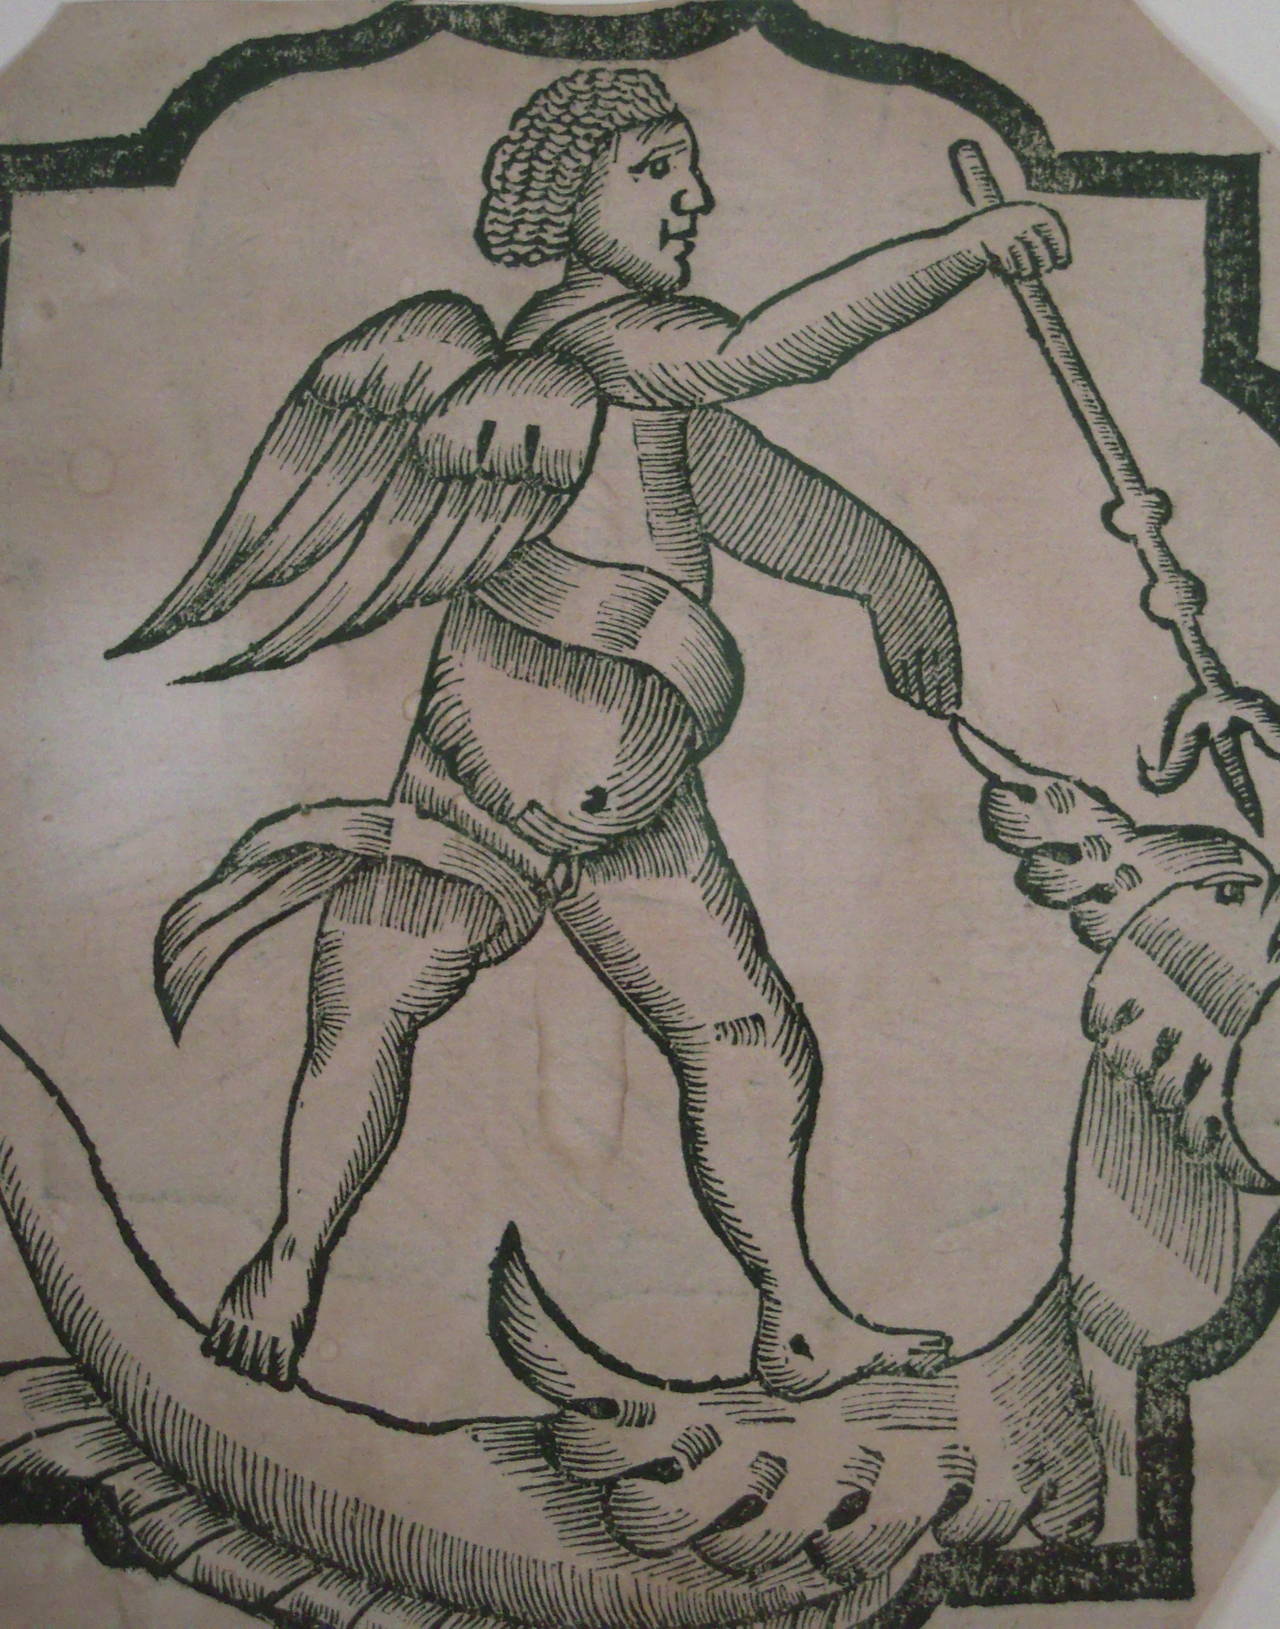 European Charming Early Woodcut of St Michael Slaying the Dragon